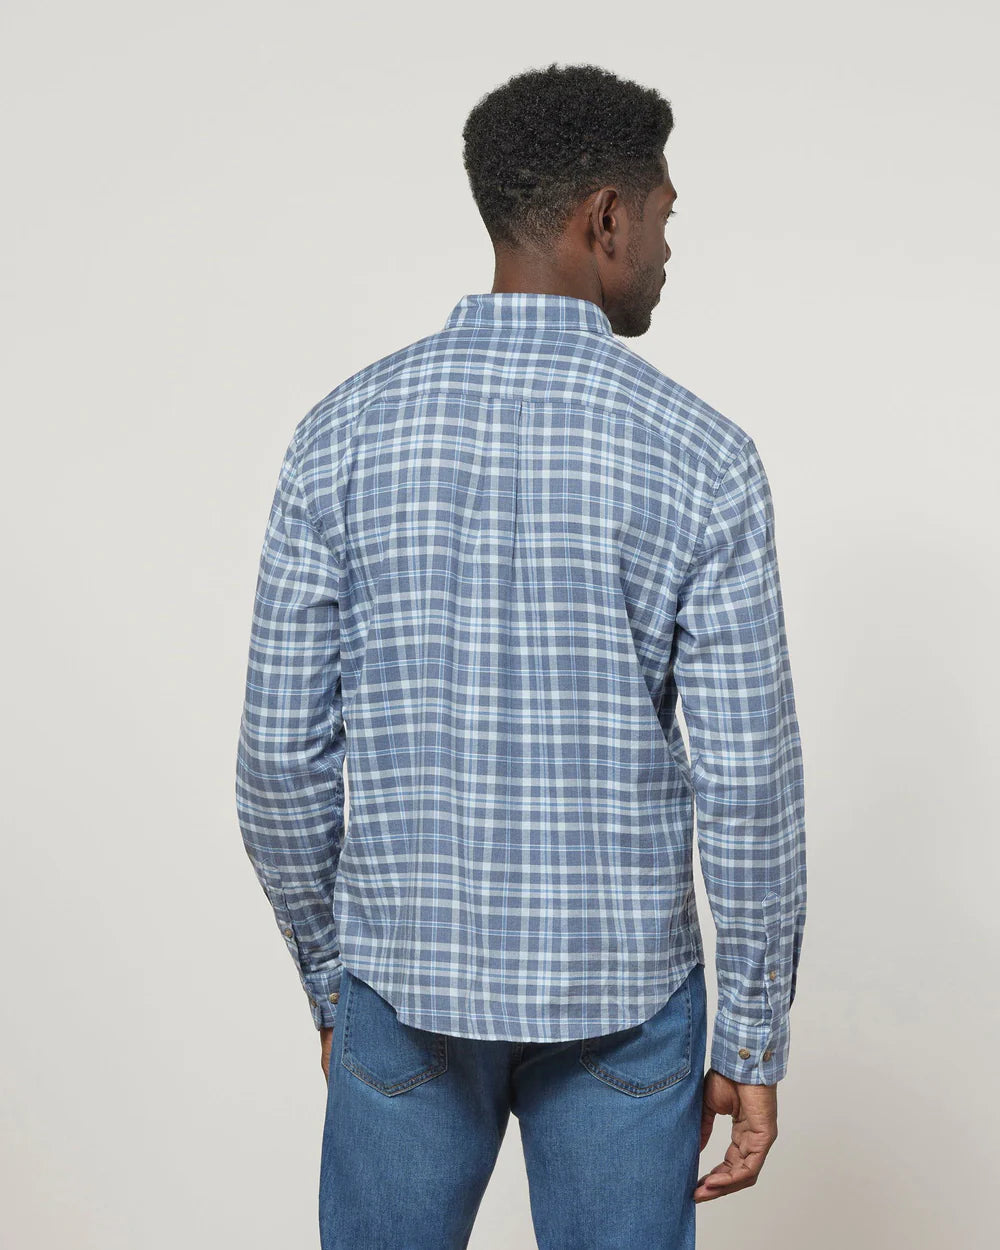 Johnnie-O Roan Hangin' Out Button Up Shirt